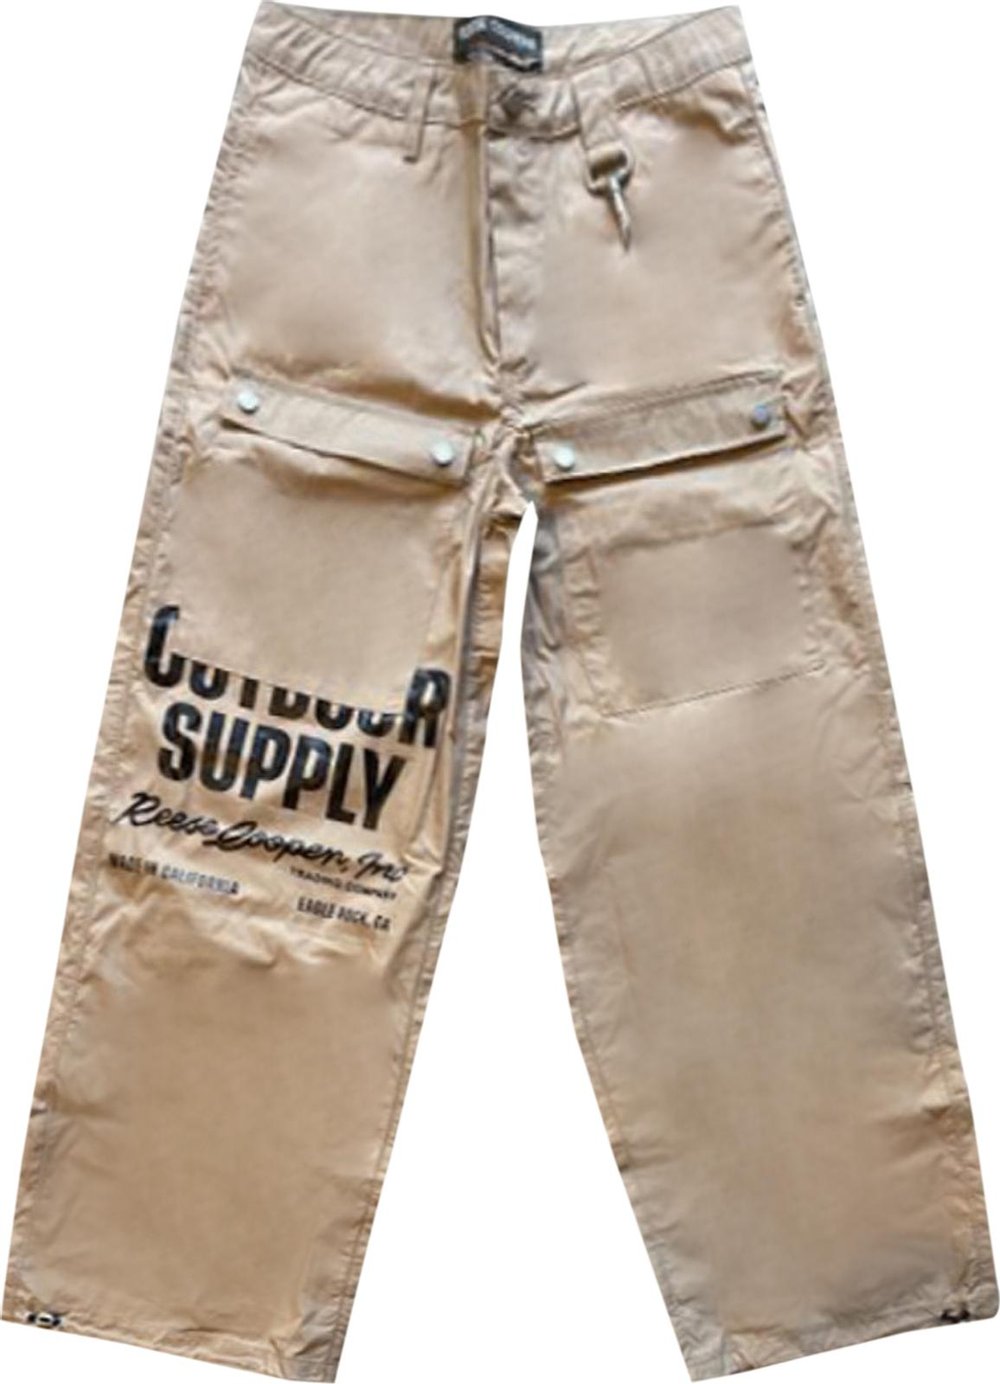 Buy Reese Cooper Outdoor Supply Waxed Cotton Pant 'Khaki' - FA00088 | GOAT